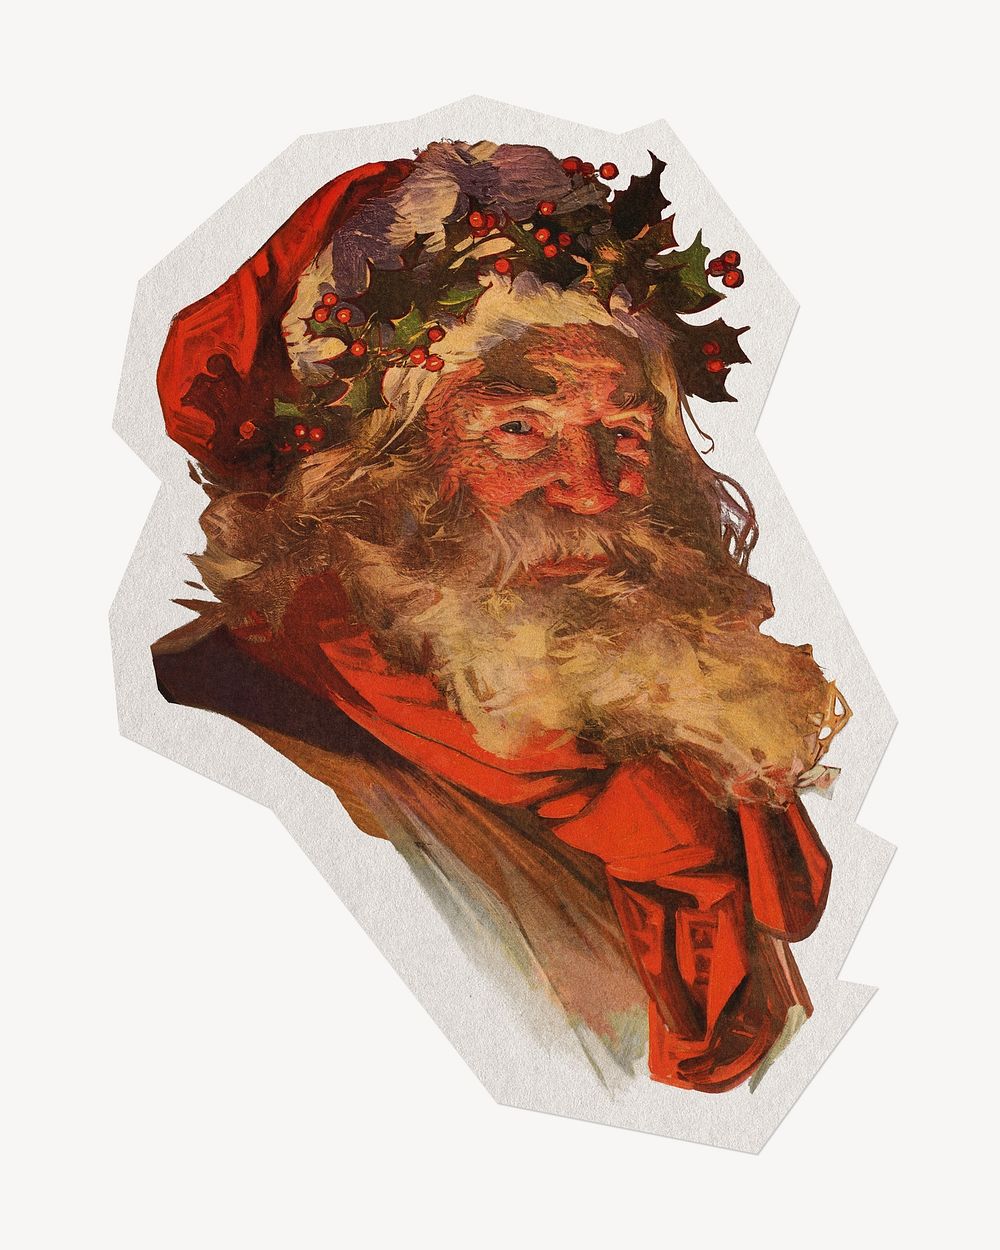 Santa Claus paper collage element, illustration by Joseph Christian Leyendecker, remixed by rawpixel.